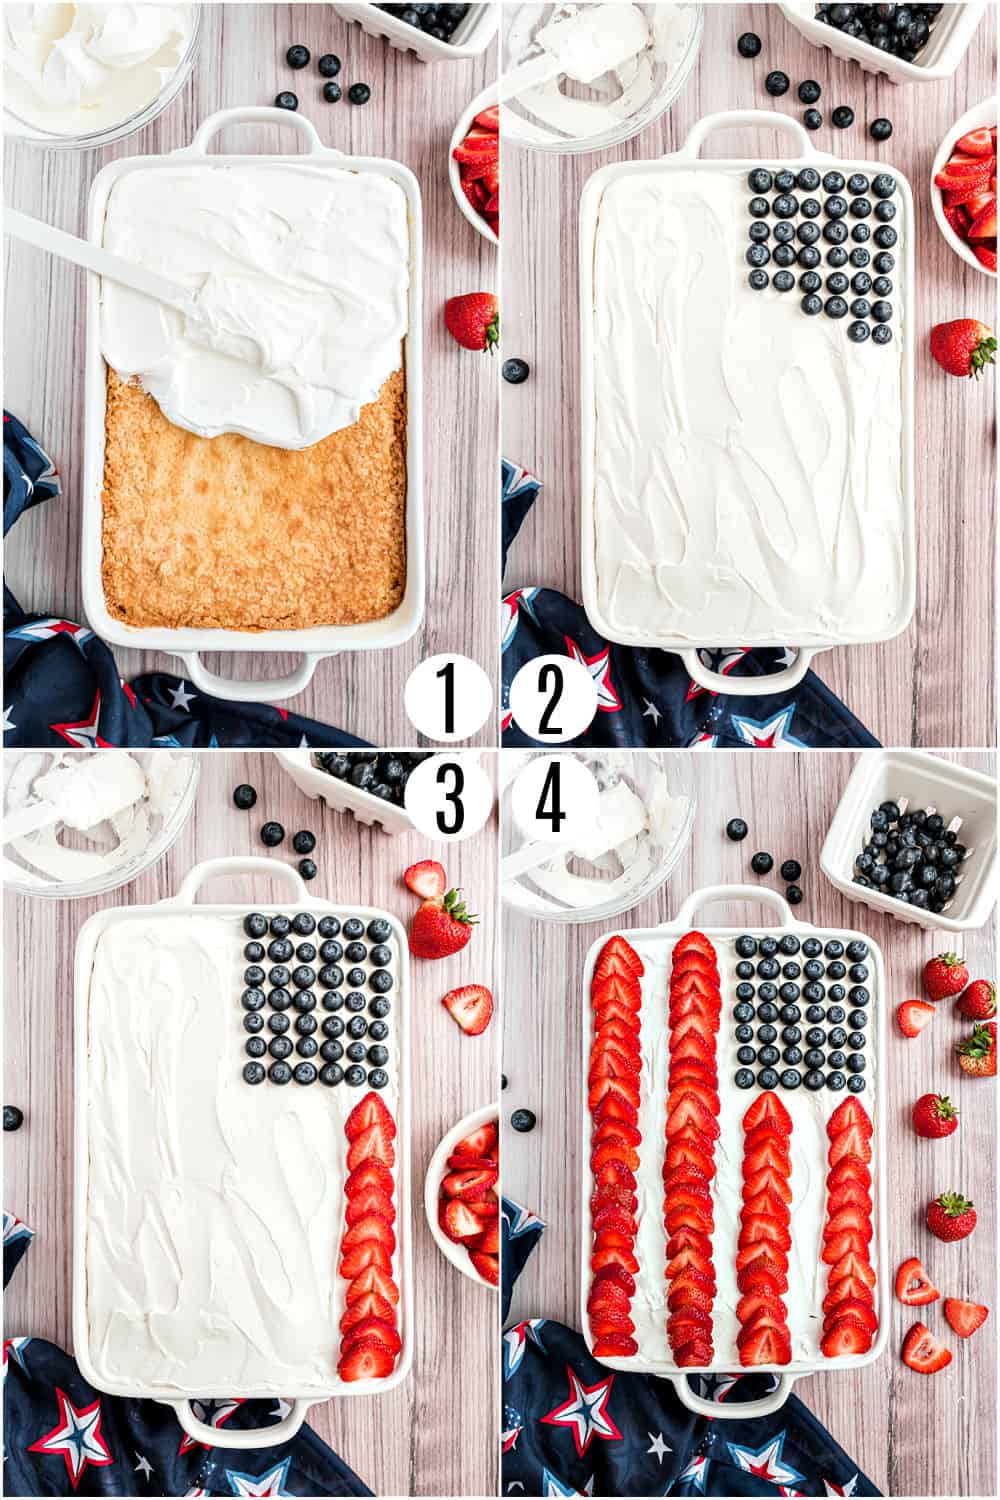 Step by step photos showing how to assemble a flag cake.